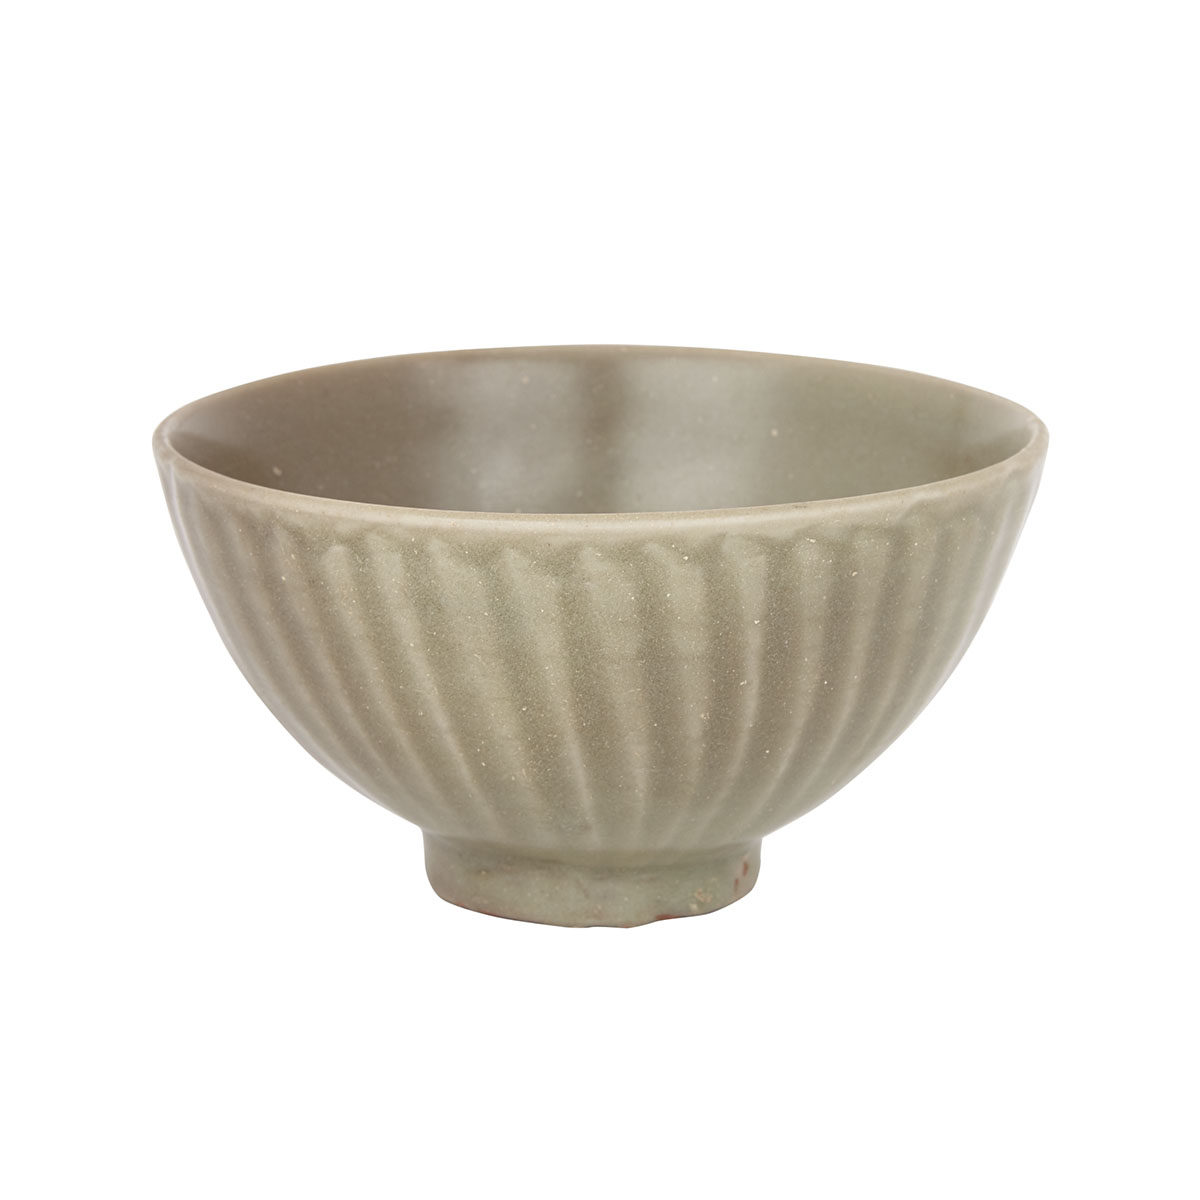 A Longquan Celadon Petal-Carved Bowl, Southern Song-Yuan Dynasty, 13th Century